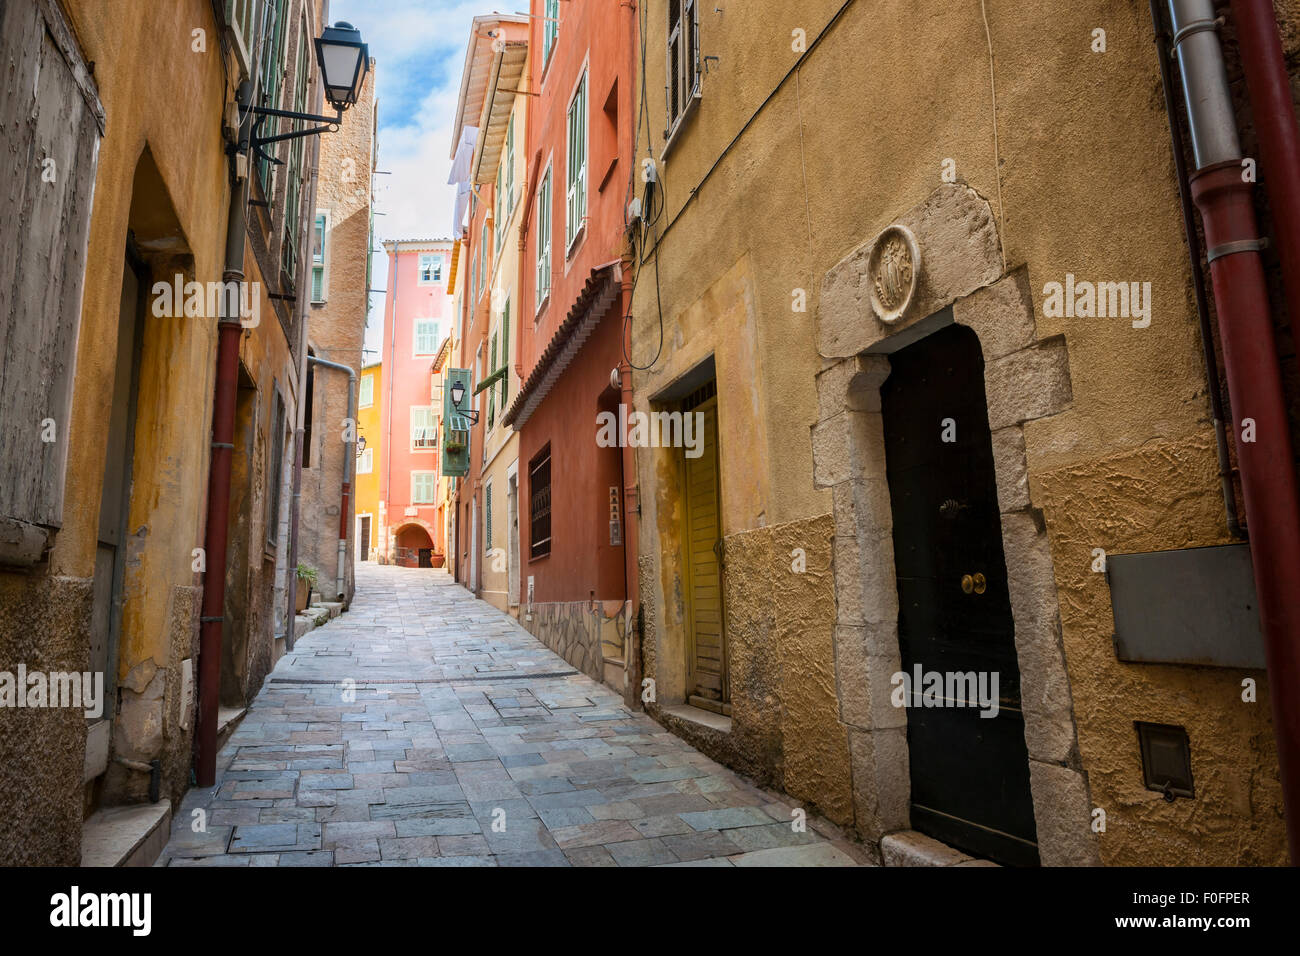 Narrow cobblestone street in medieval town Villefranche-sur-Mer on French Riviera, France. Stock Photo